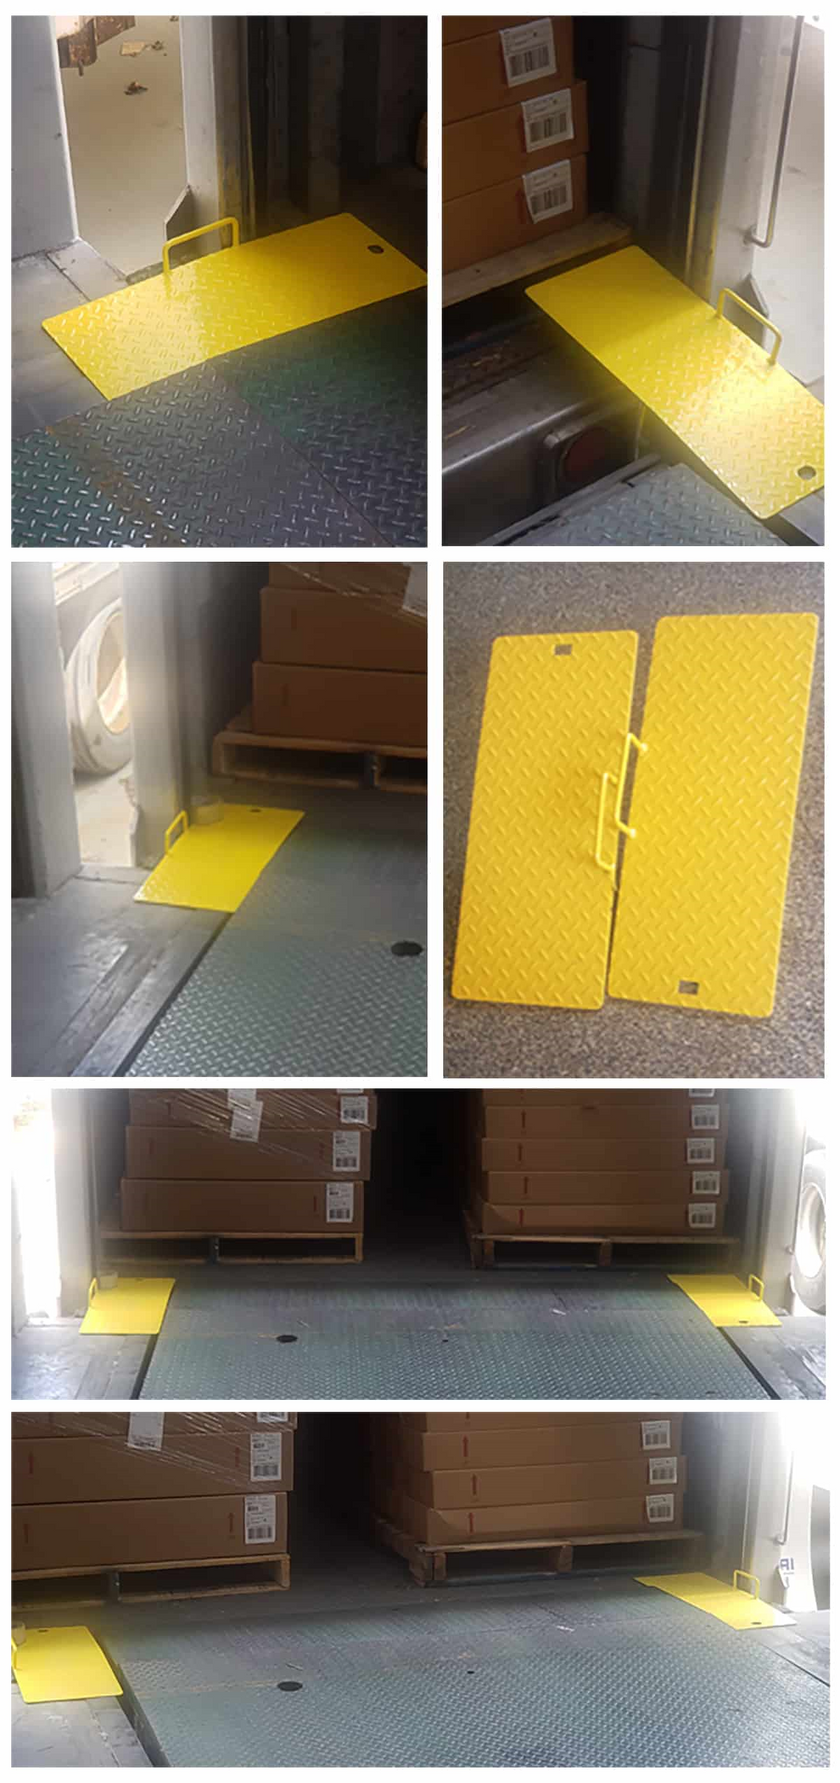 Mini dock plates for dock safety in the Inland Empire